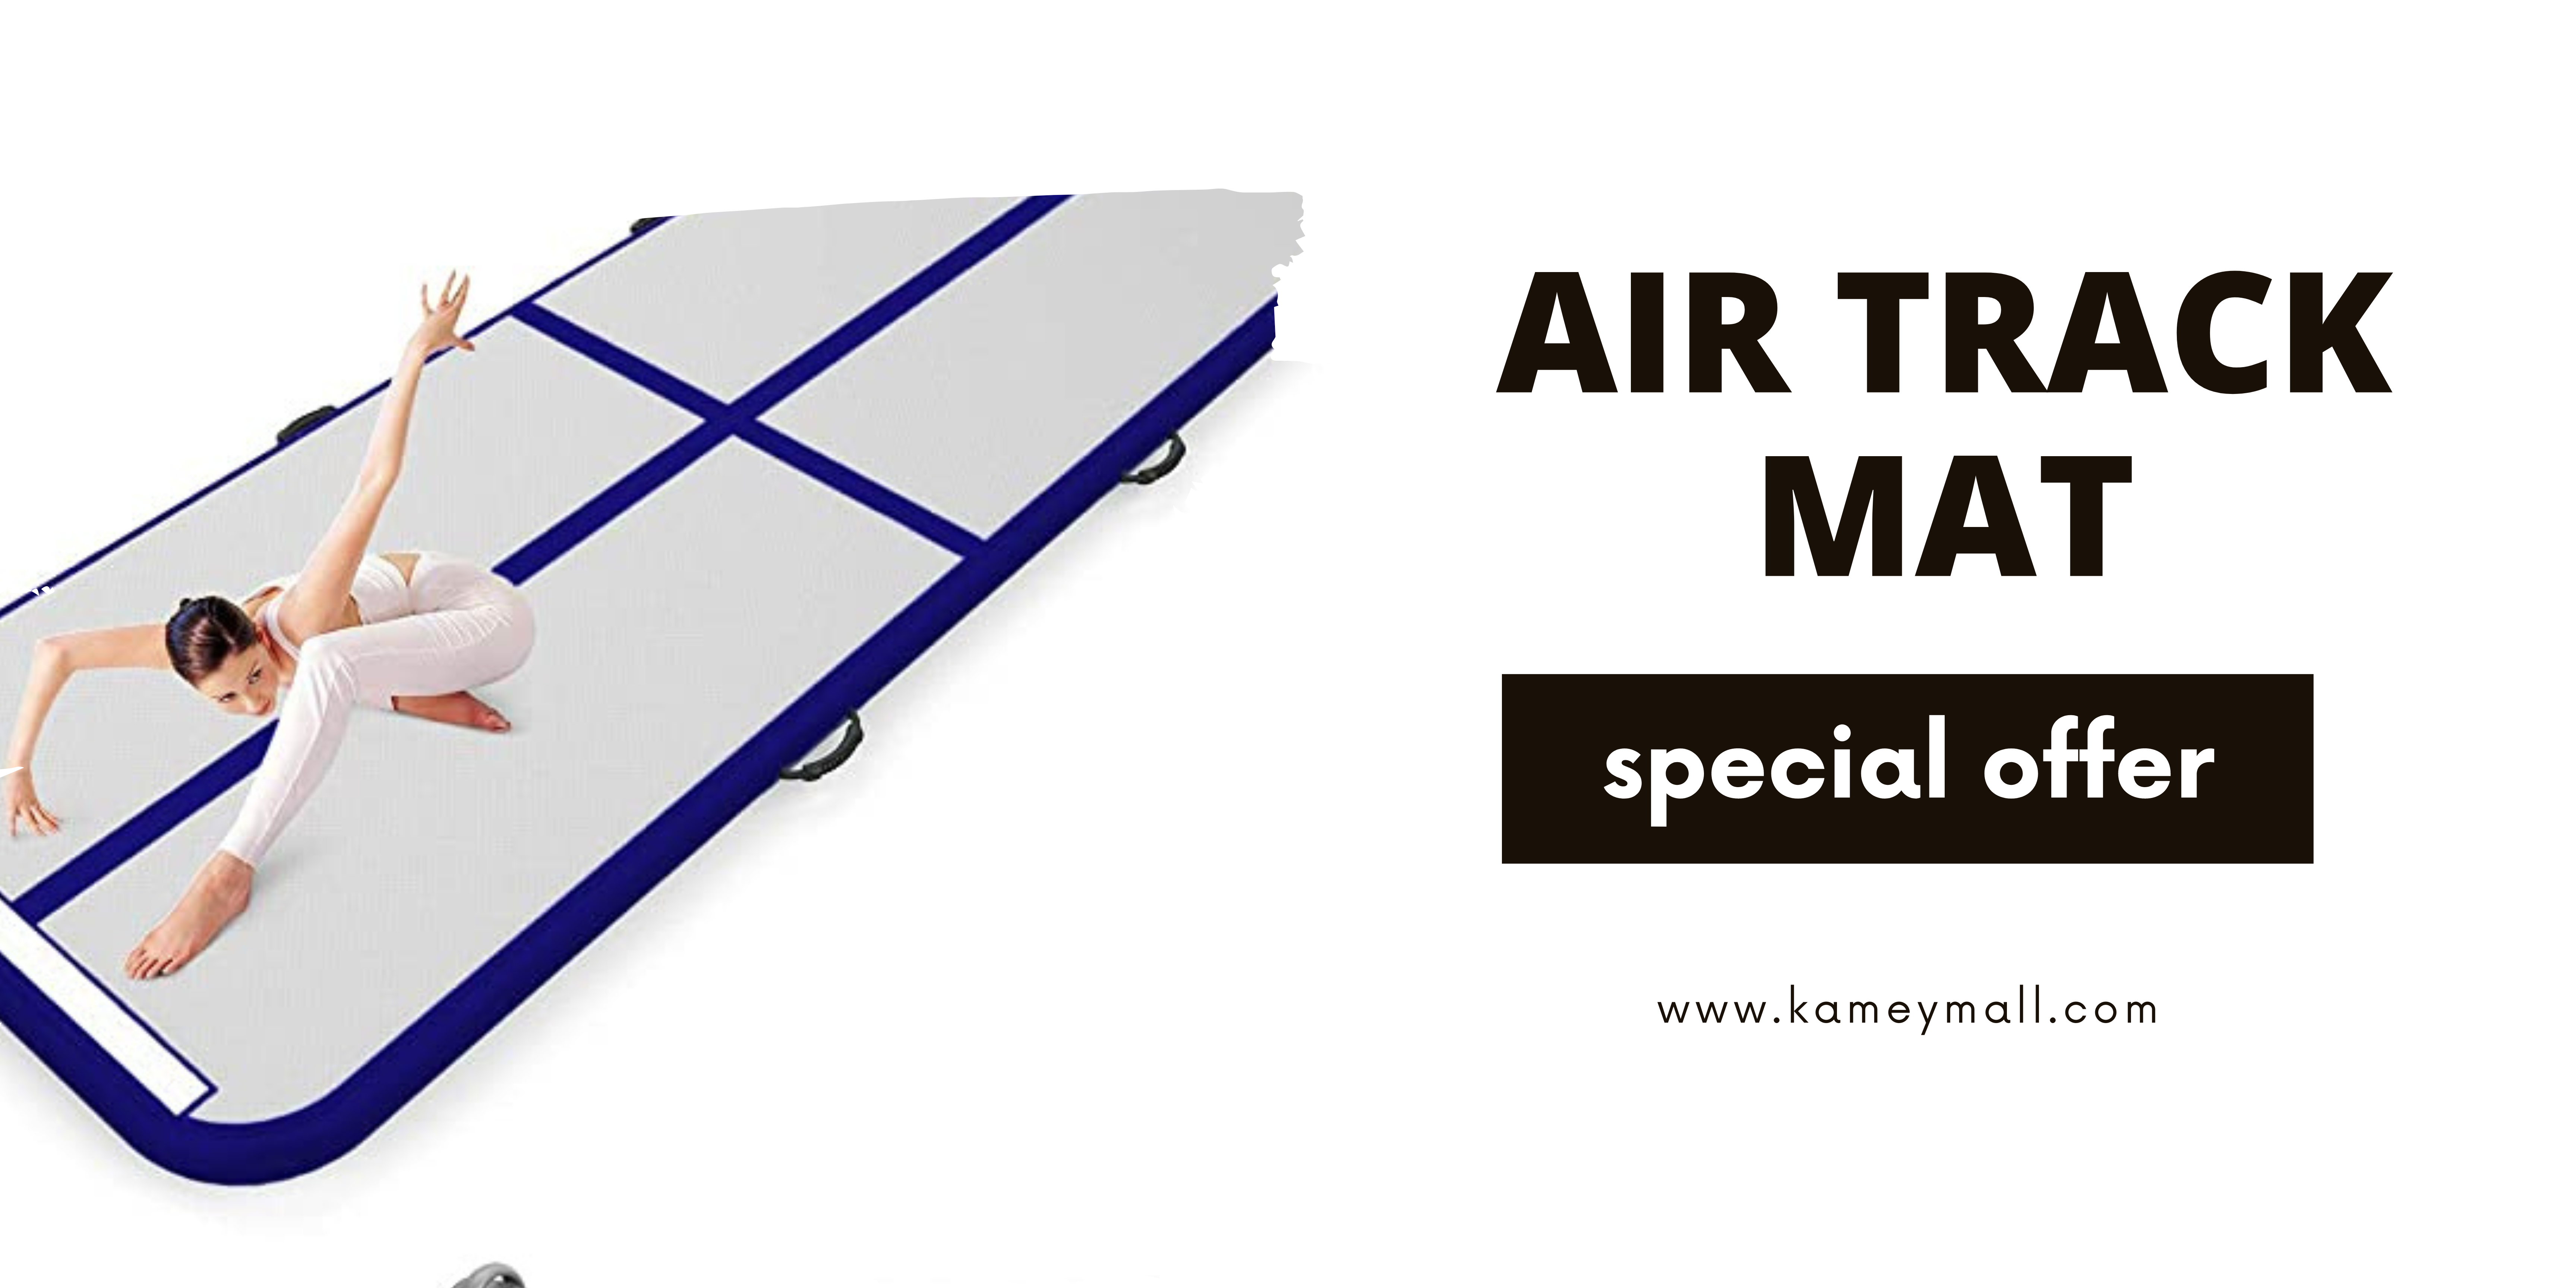 Get The Most Prominent Air Track Mat From Kameymall